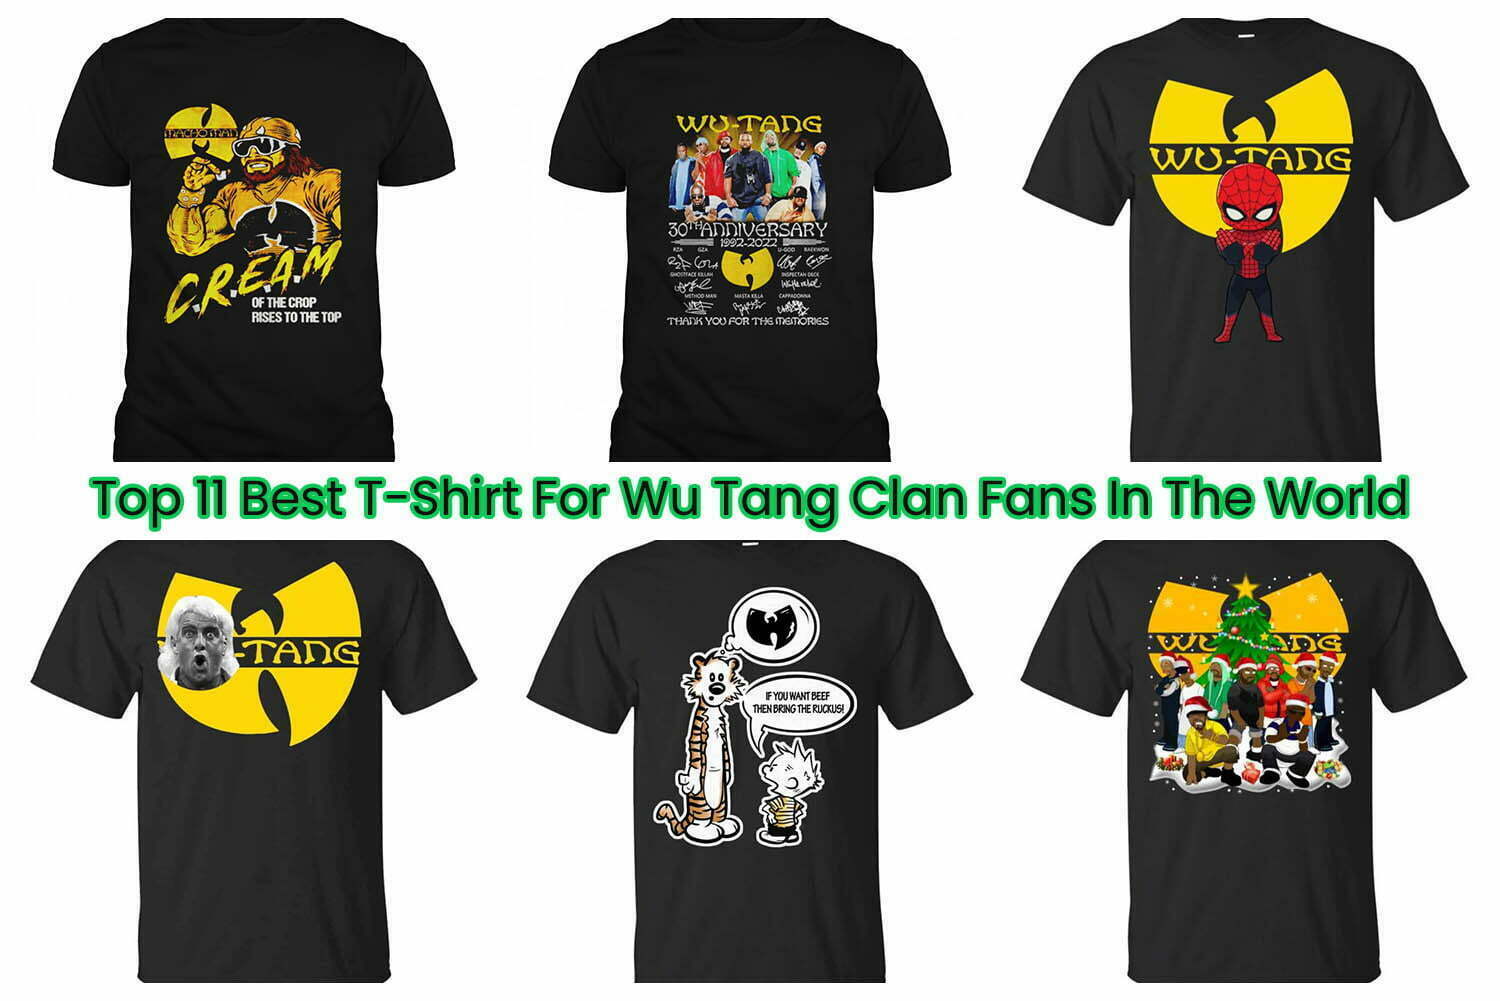 Top 11 Best T-Shirt For Wu Tang Clan Fans In The World